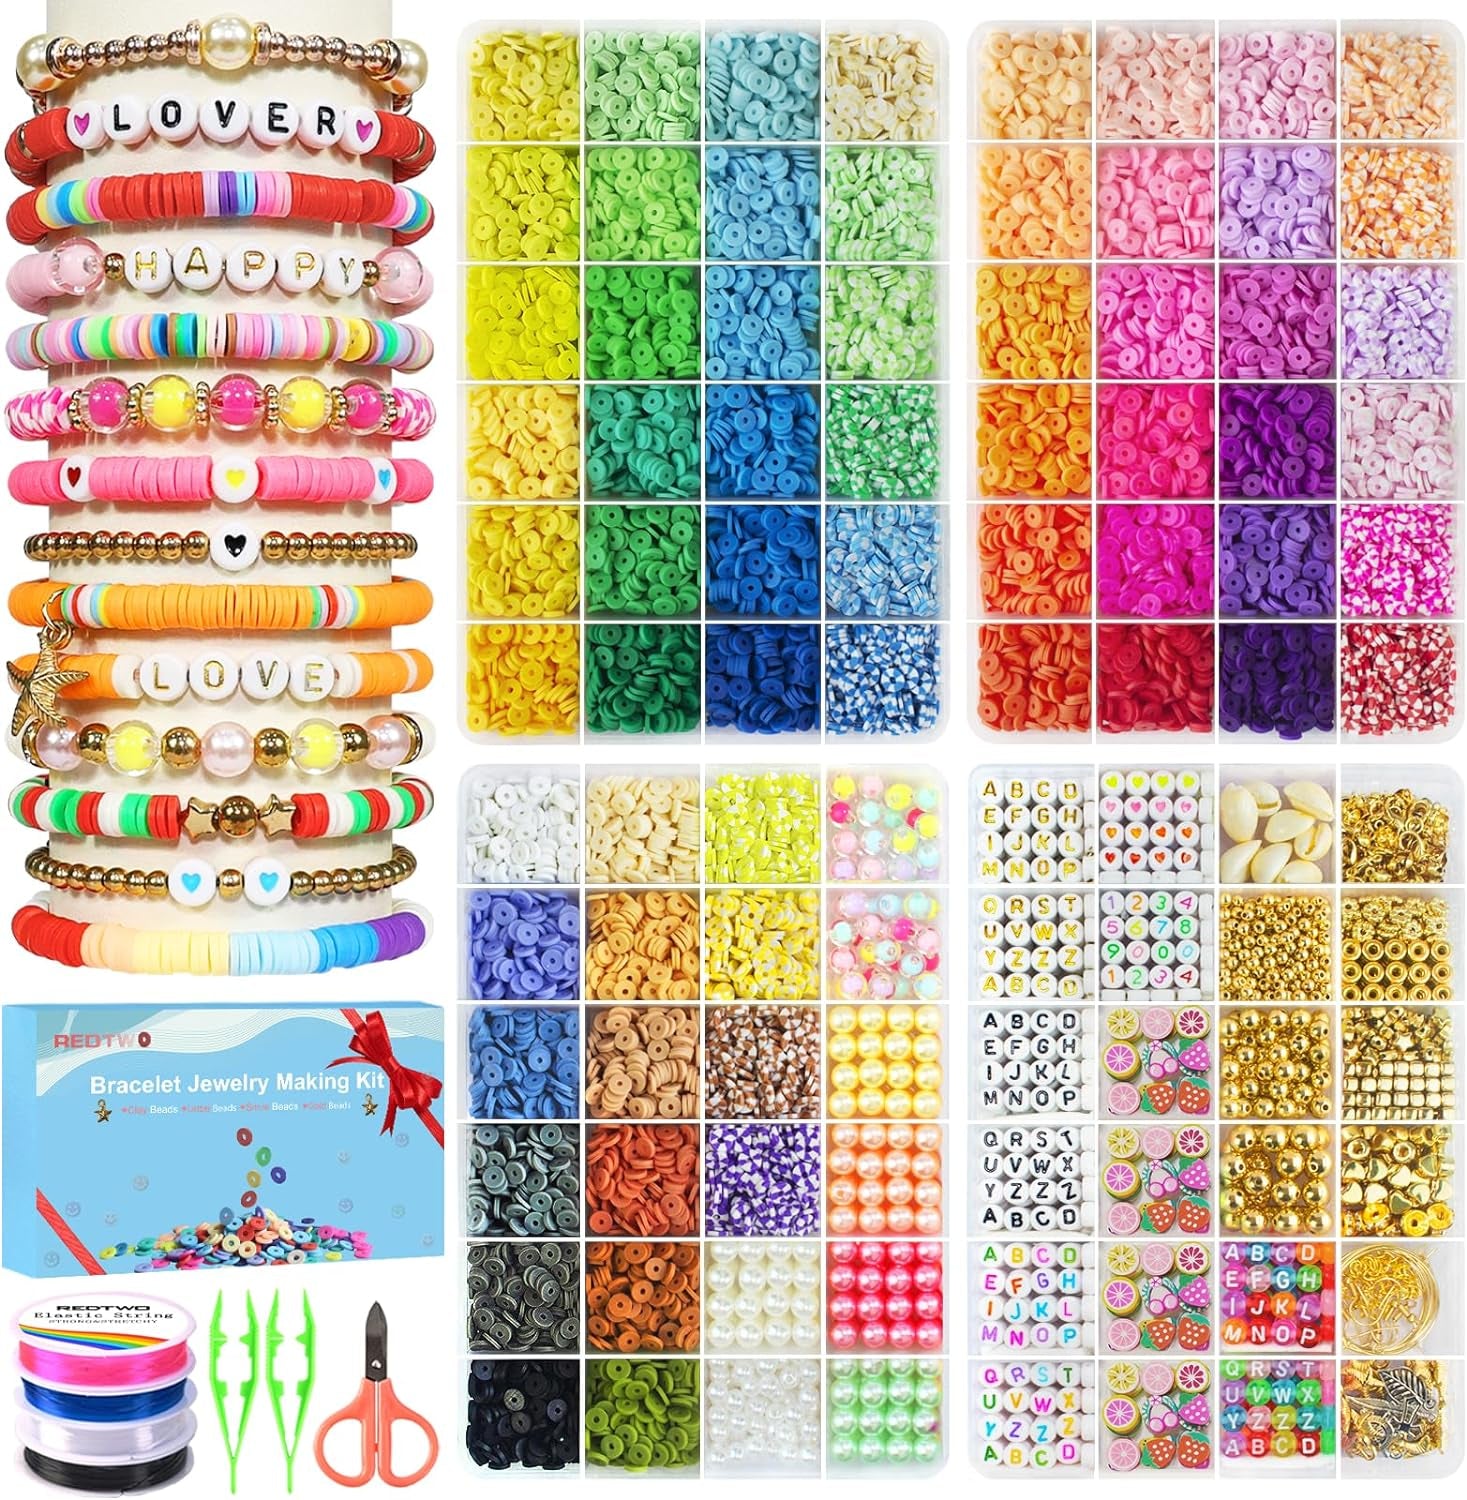 5100 Clay Beads Bracelet Making Kit, Flat Preppy Beads for Friendship Jewelry Making,Polymer Heishi Beads with Charms Gifts for Teen Girls Crafts for Girls Ages 8-12